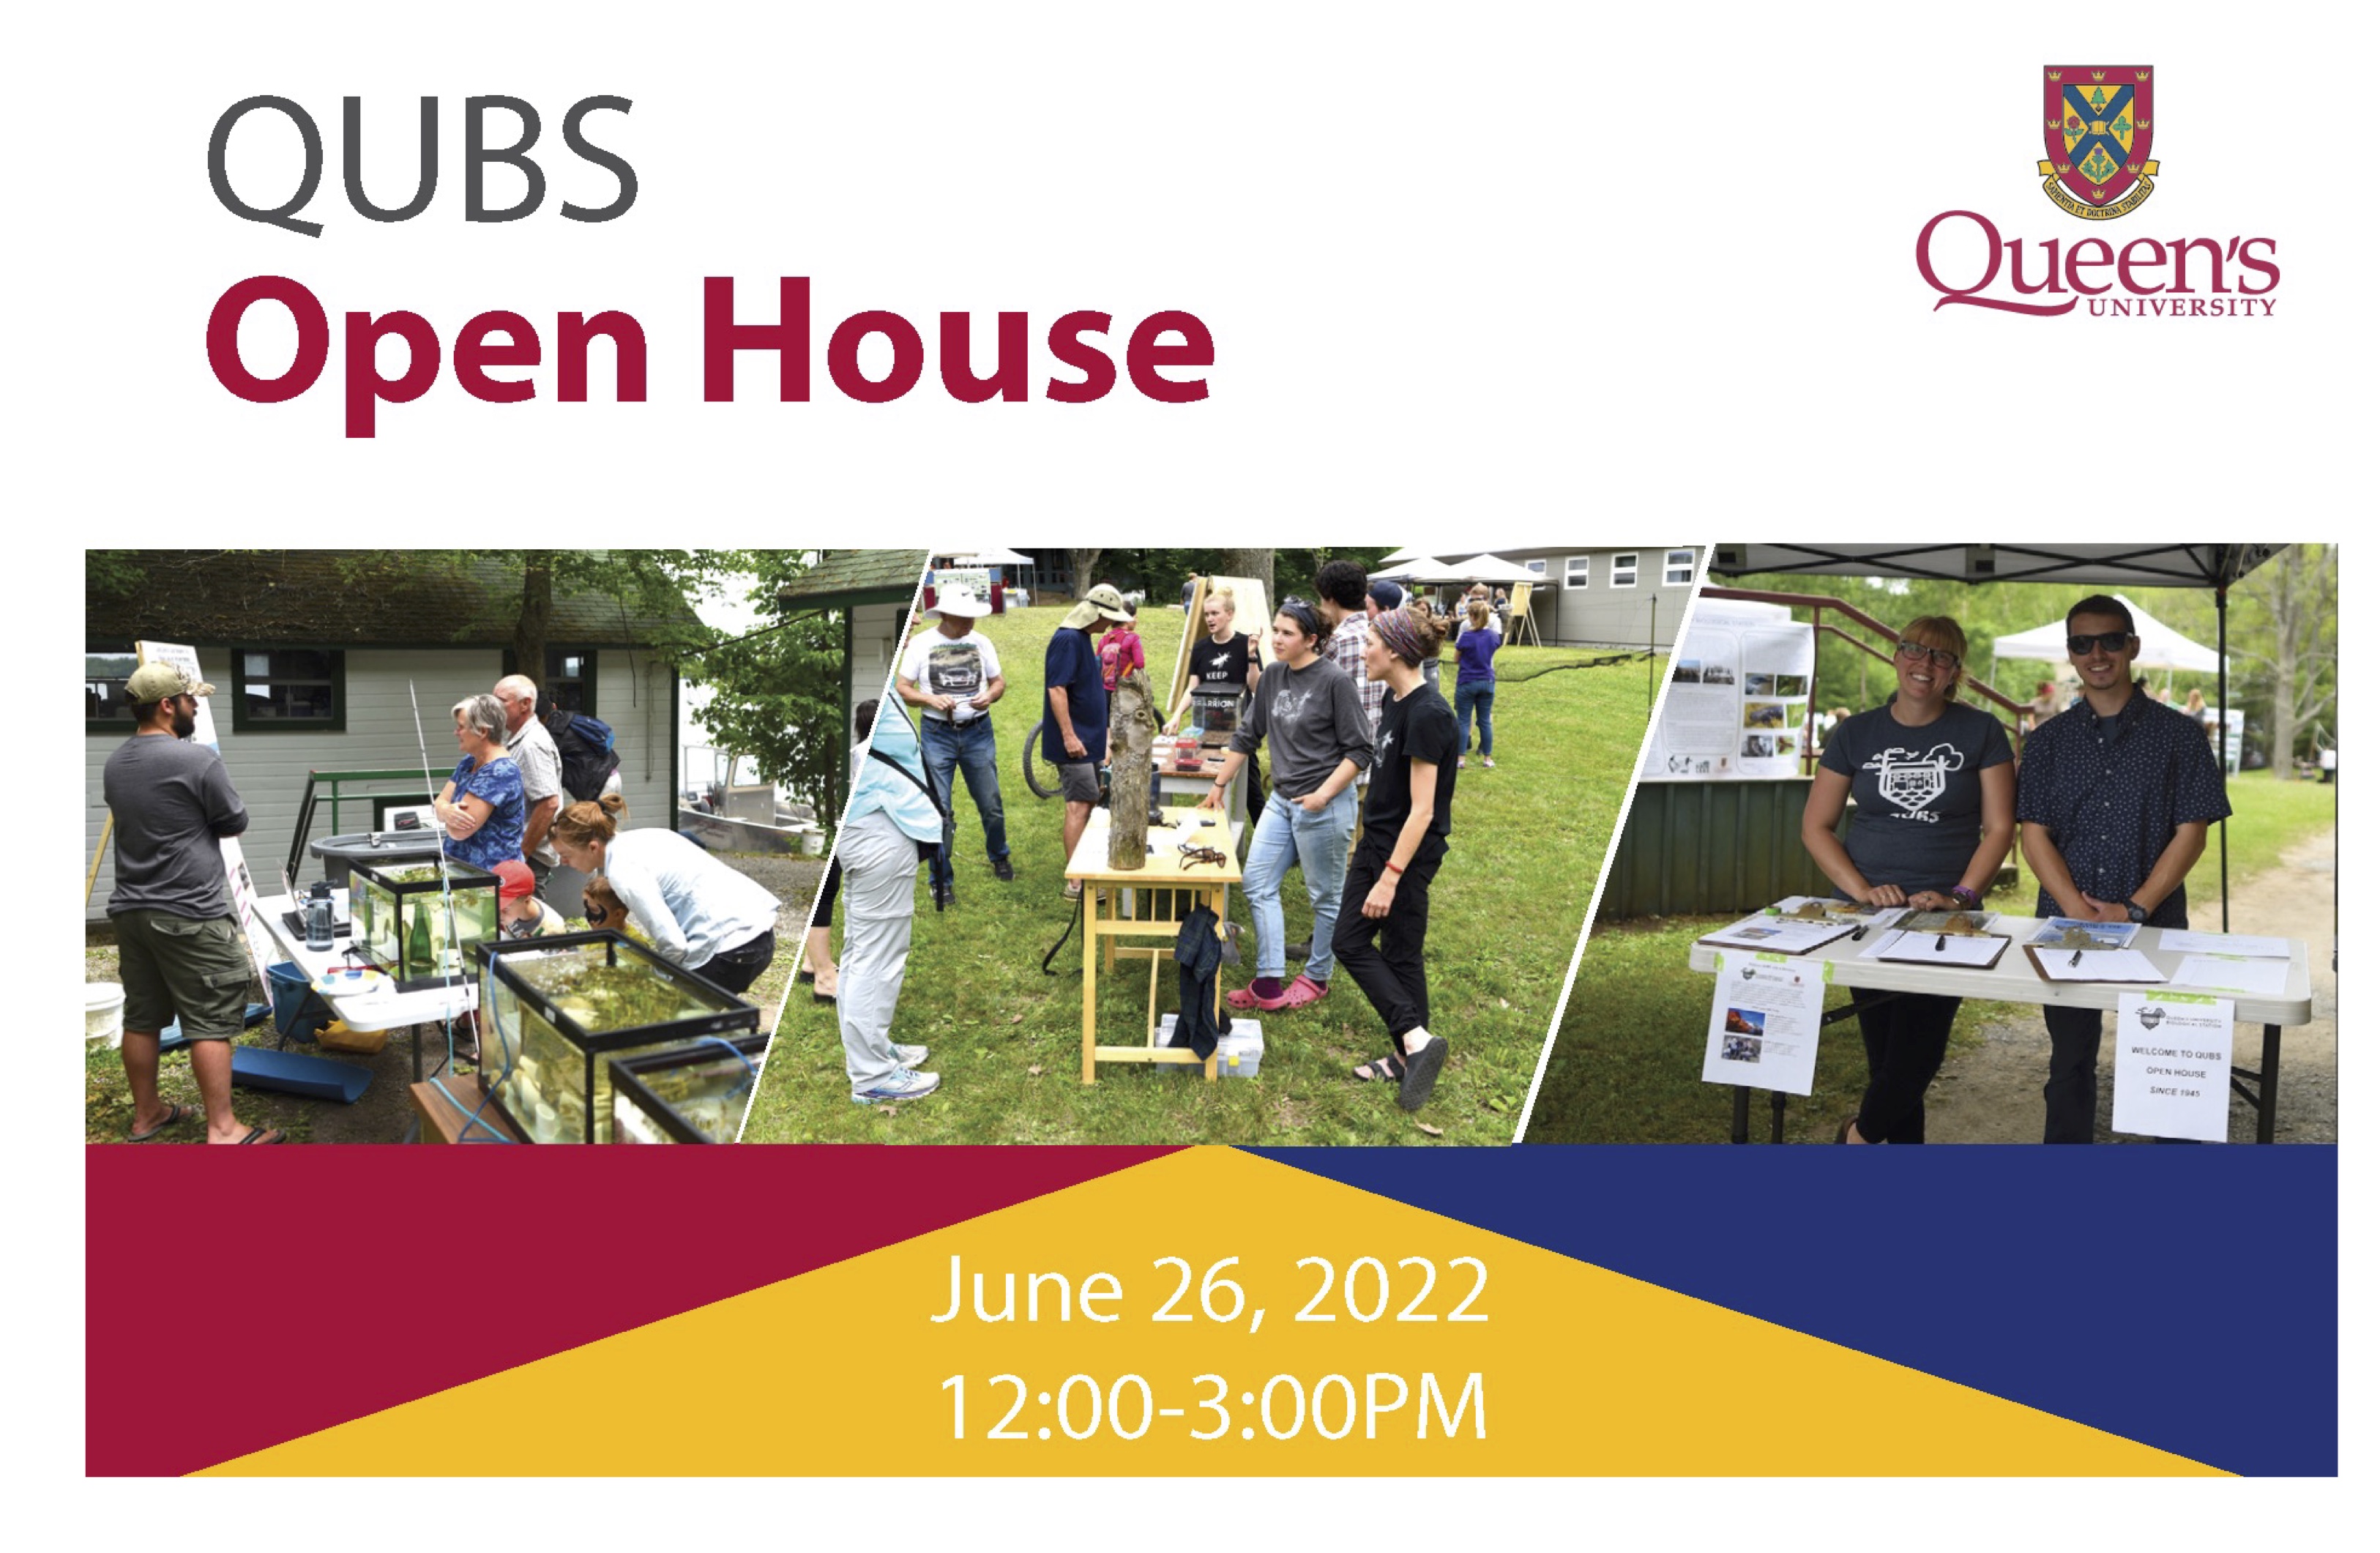 QUBS Open House 2022 Post Card